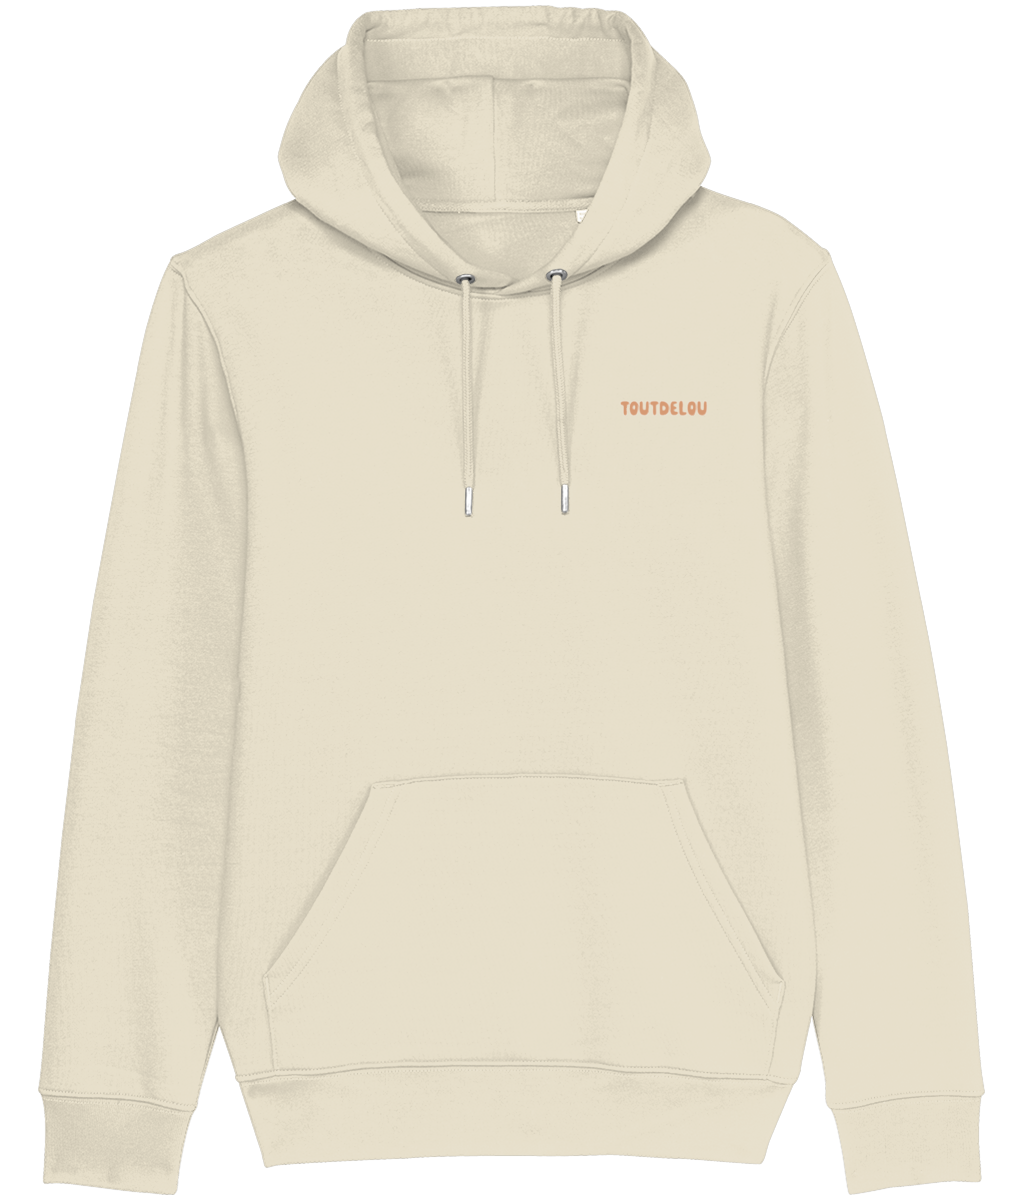 Hoodie - pet all the dogs - peach - print on front and back